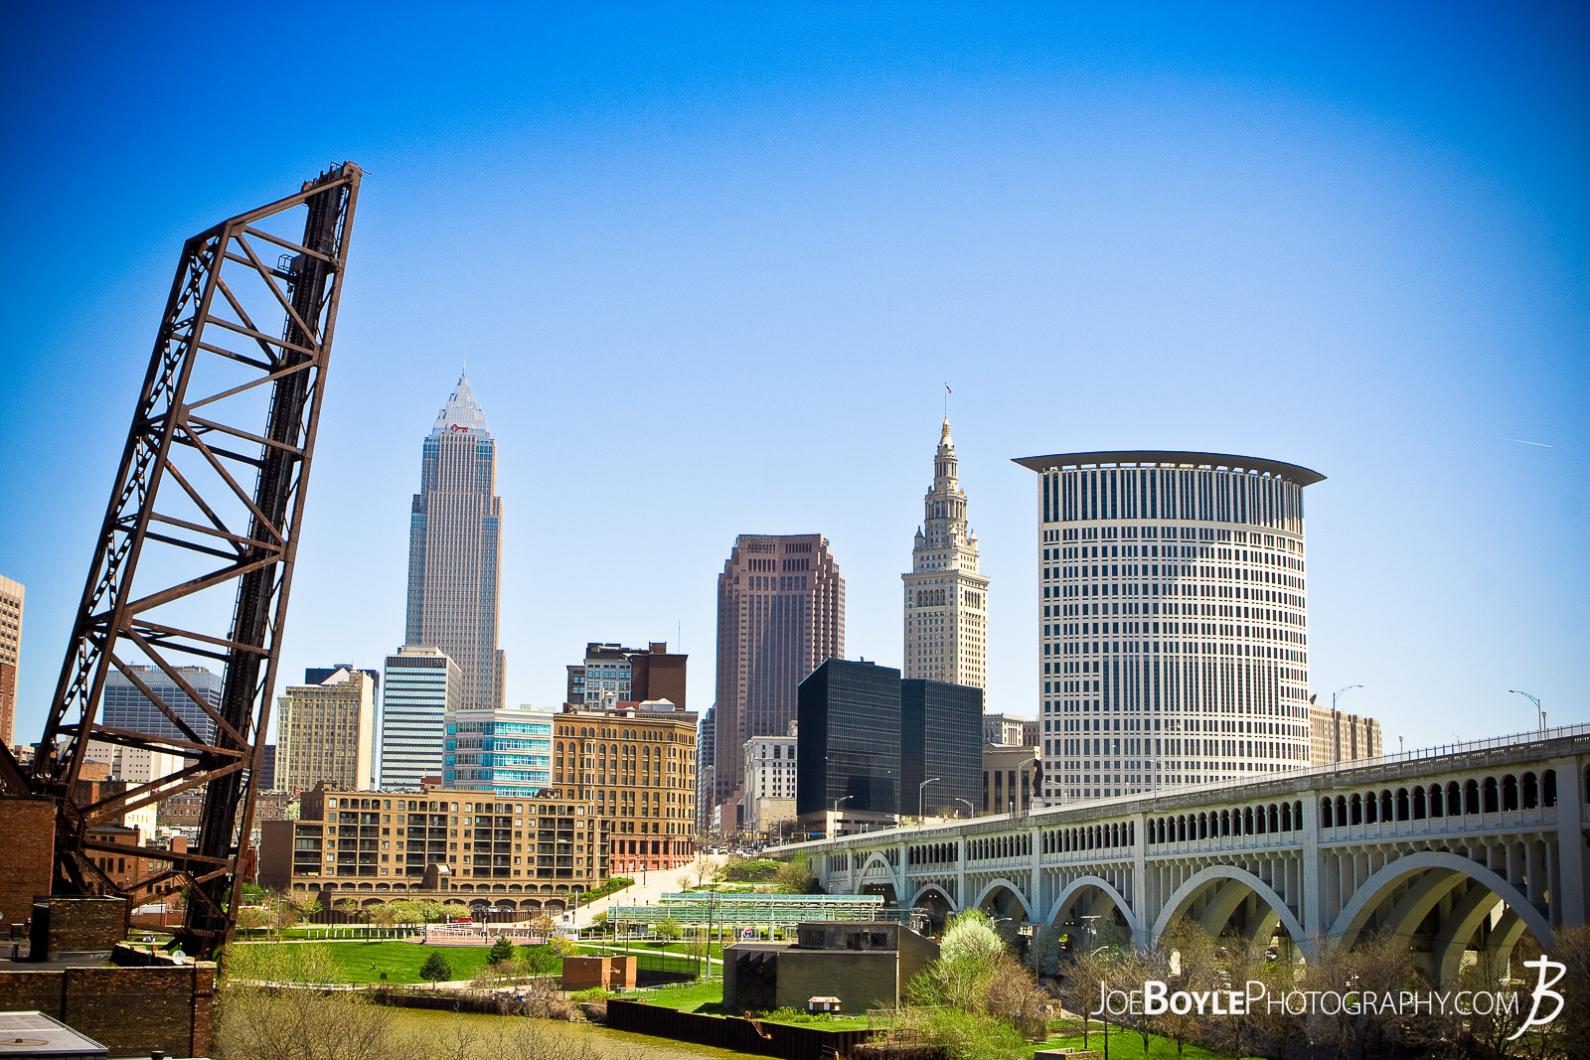 A photo of the Cleveland Skyline. From left to right the 4 tallest buildings are The Key Tower, The BP-Huntington Building, The Terminal Tower and the Federal Courthouse.